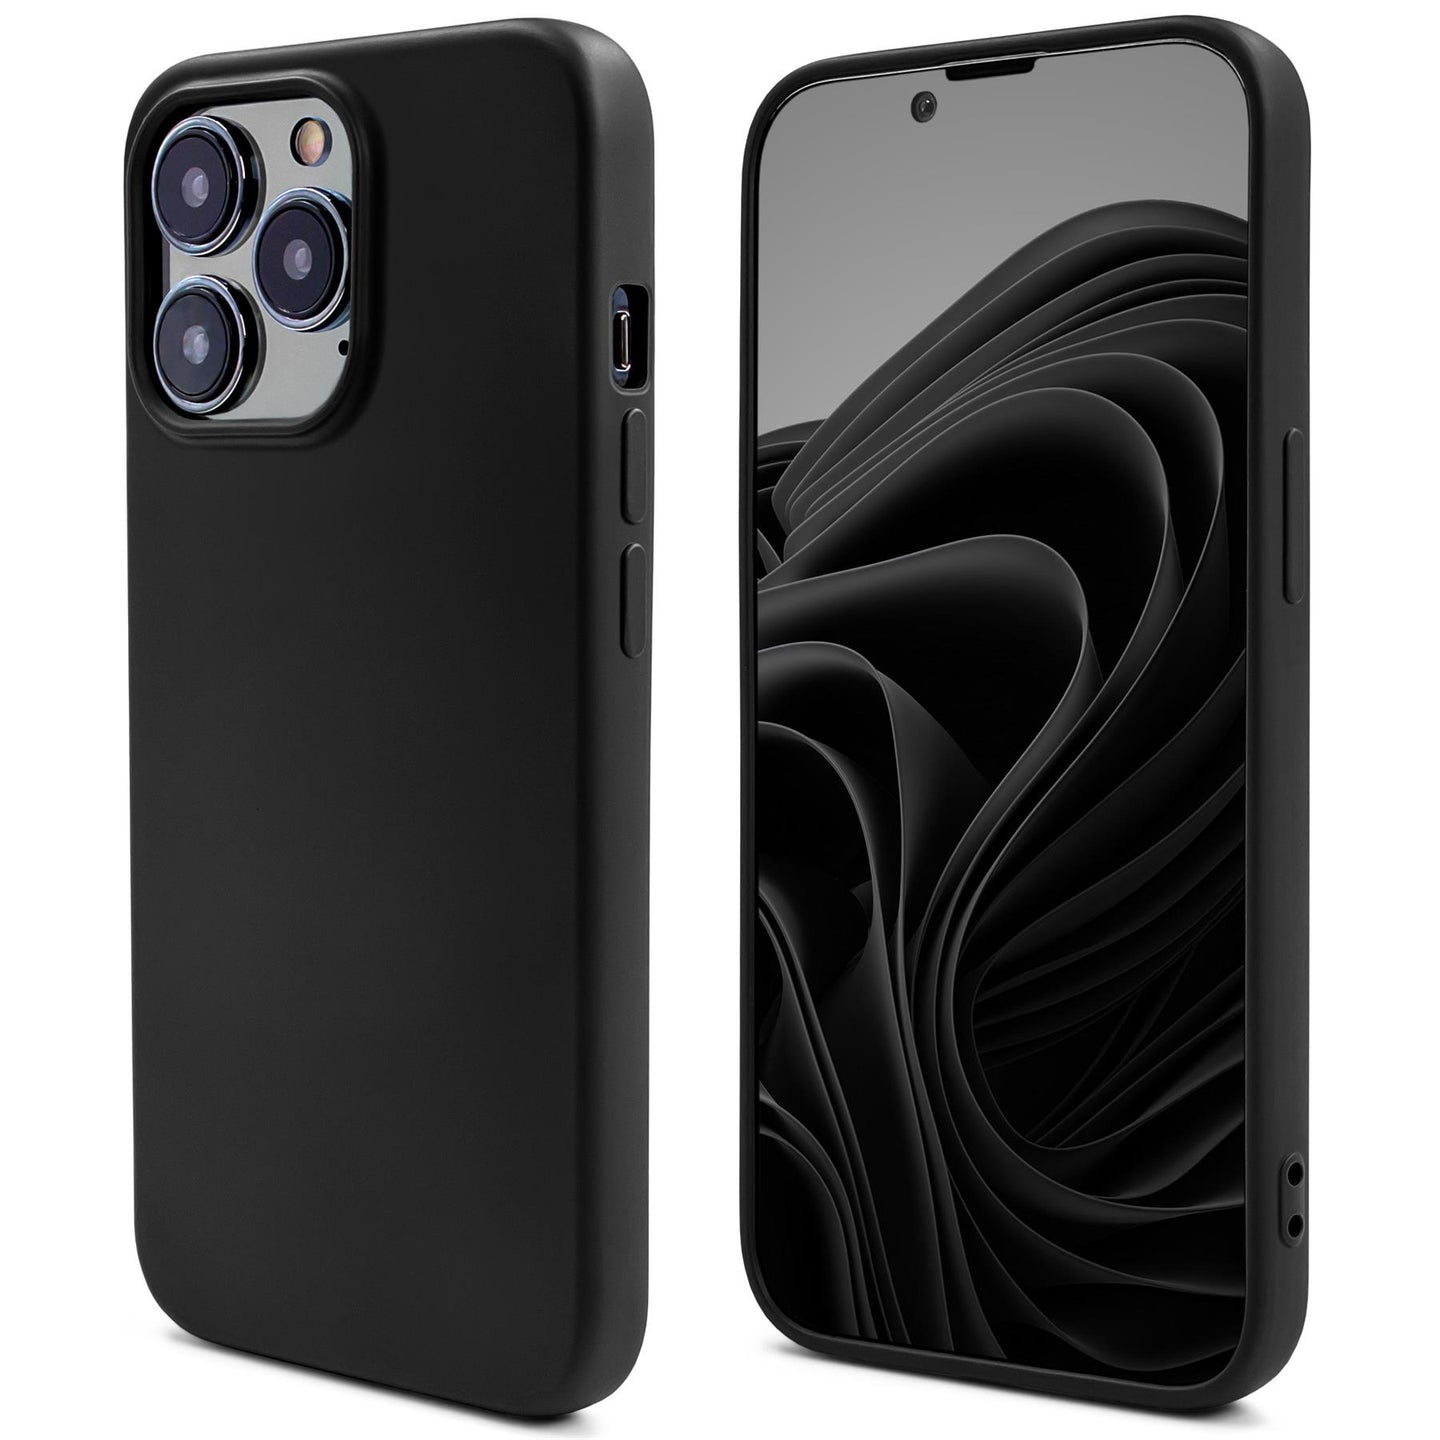 Moozy Lifestyle. Silicone Case for iPhone 14 Pro, Black - Liquid Silicone Lightweight Cover with Matte Finish and Soft Microfiber Lining, Premium Silicone Case